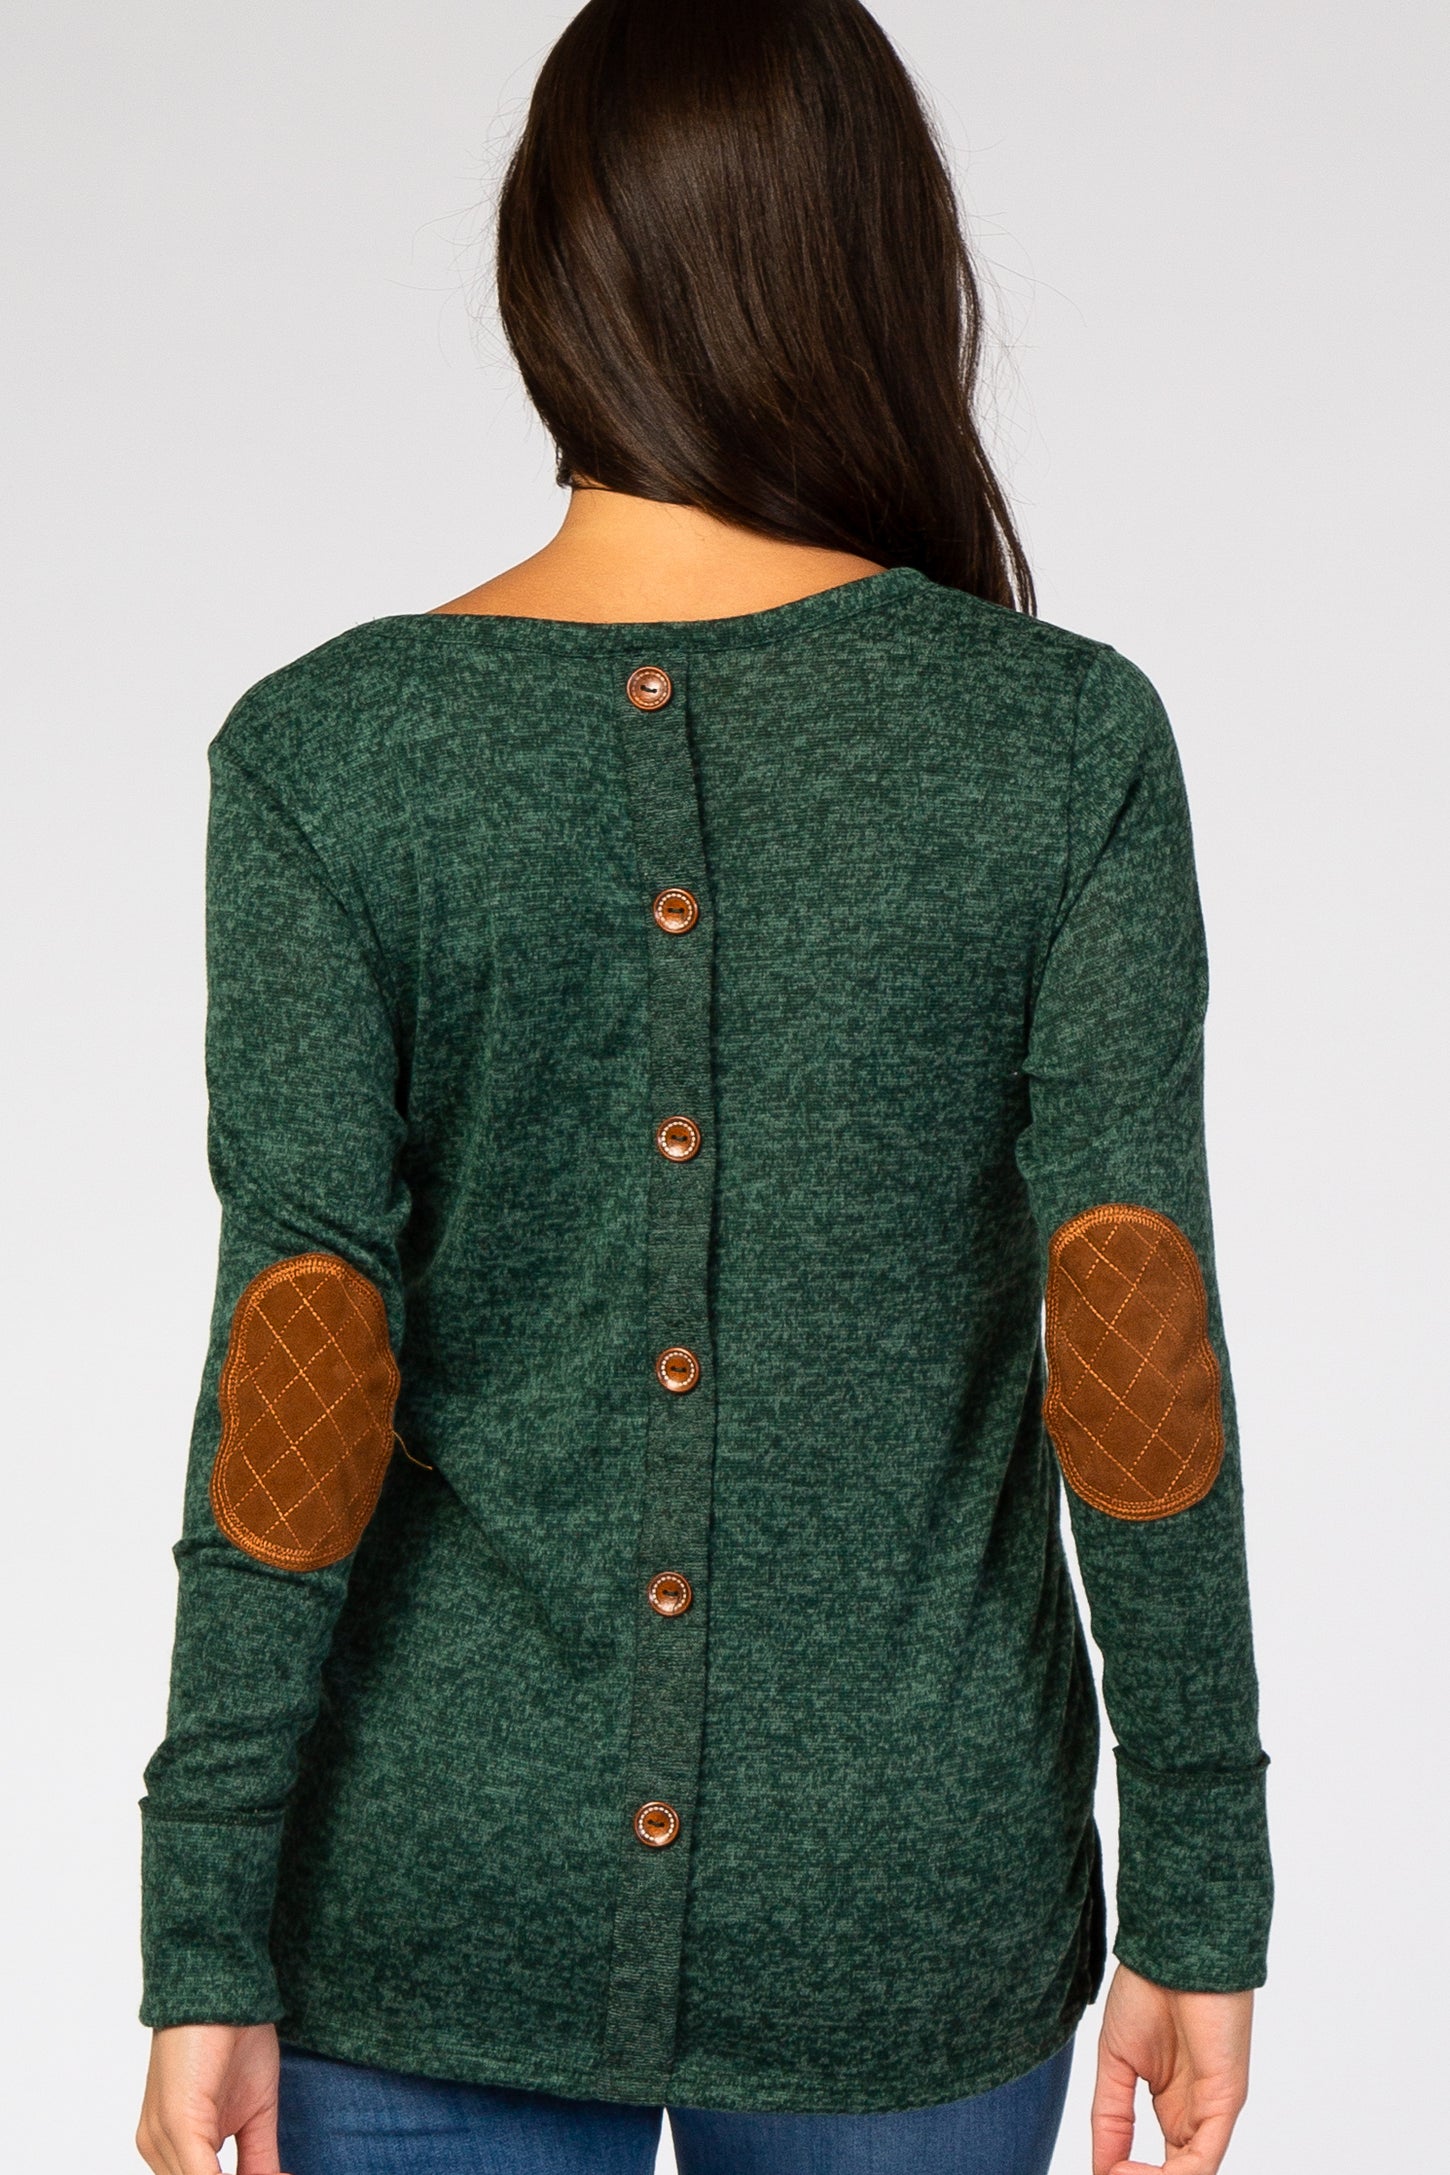 Olive Button Back Quilted Elbow Knit Top